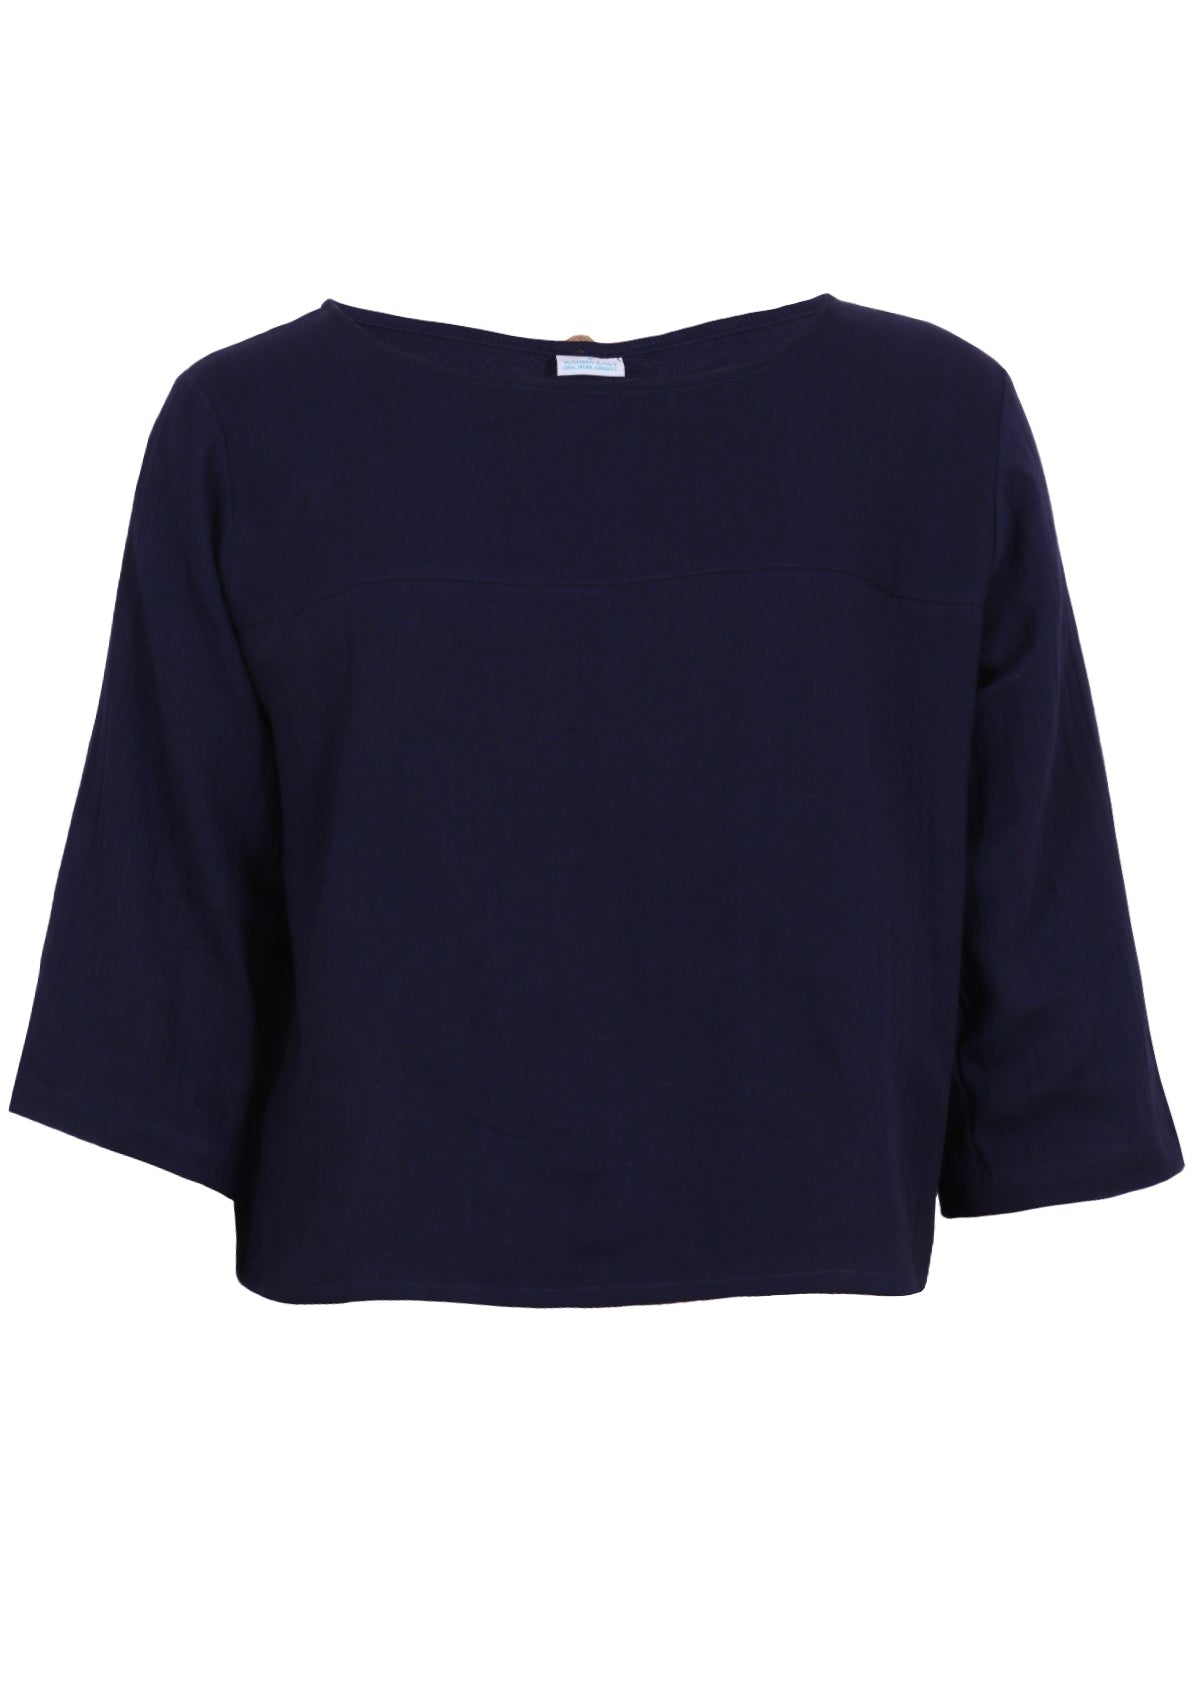 Double cotton top with 3/4 sleeves and high round neckline in dark blue